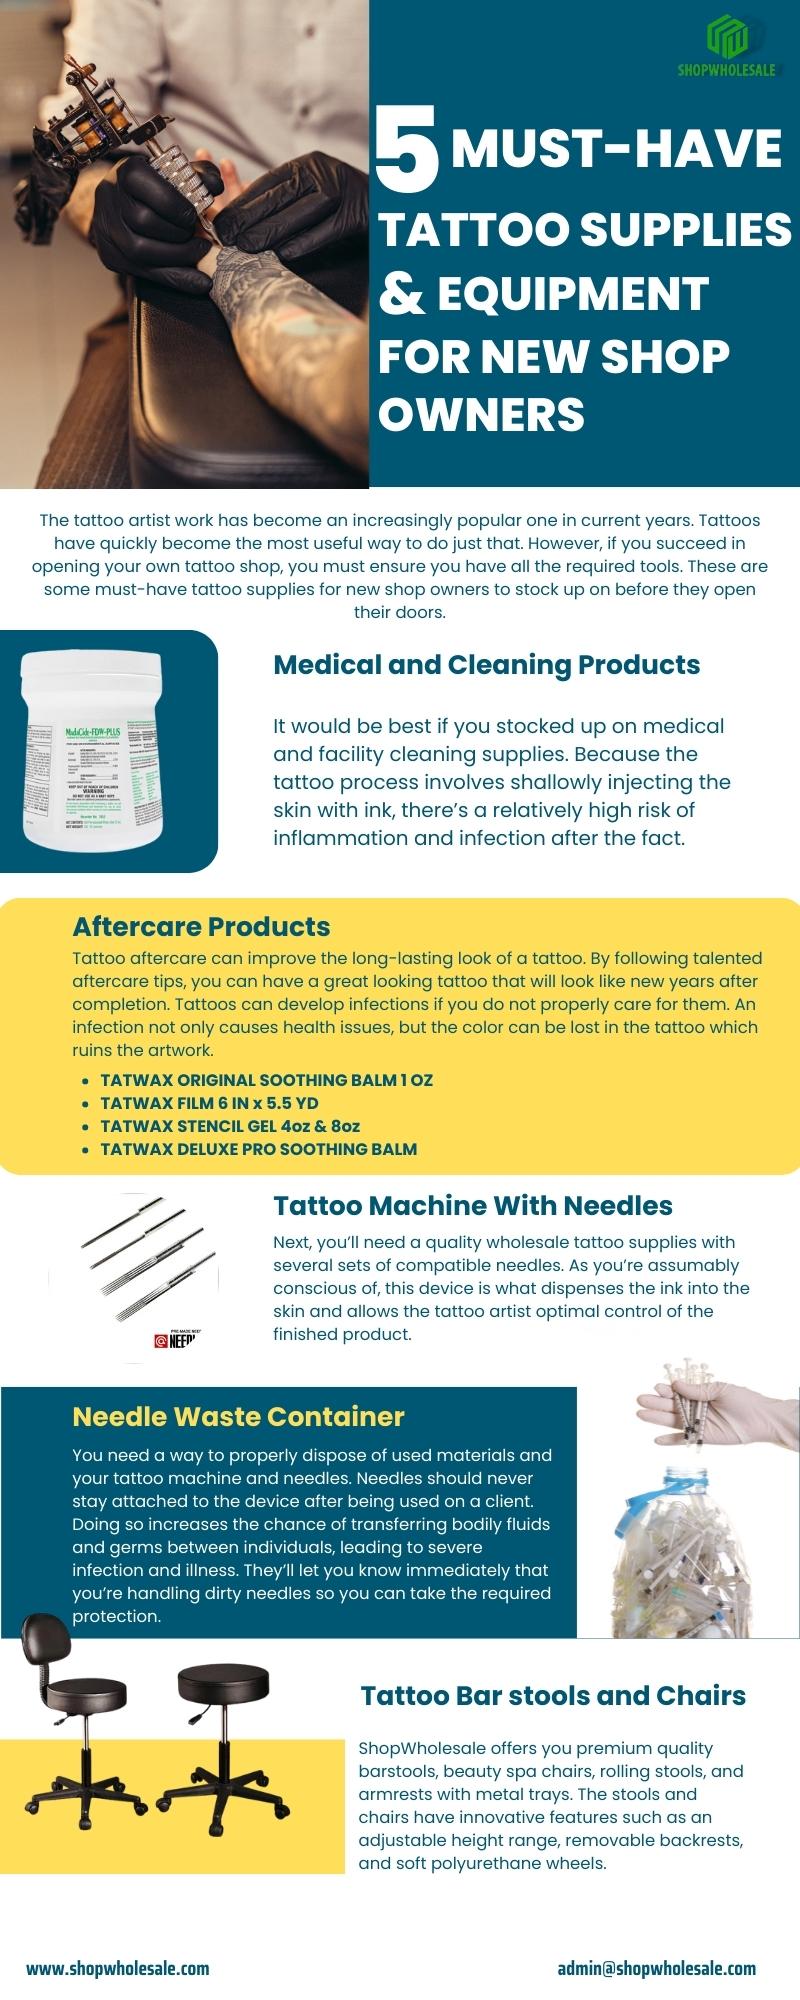 5 Must-Have Tattoo Supplies And Equipment For New Shop Owners